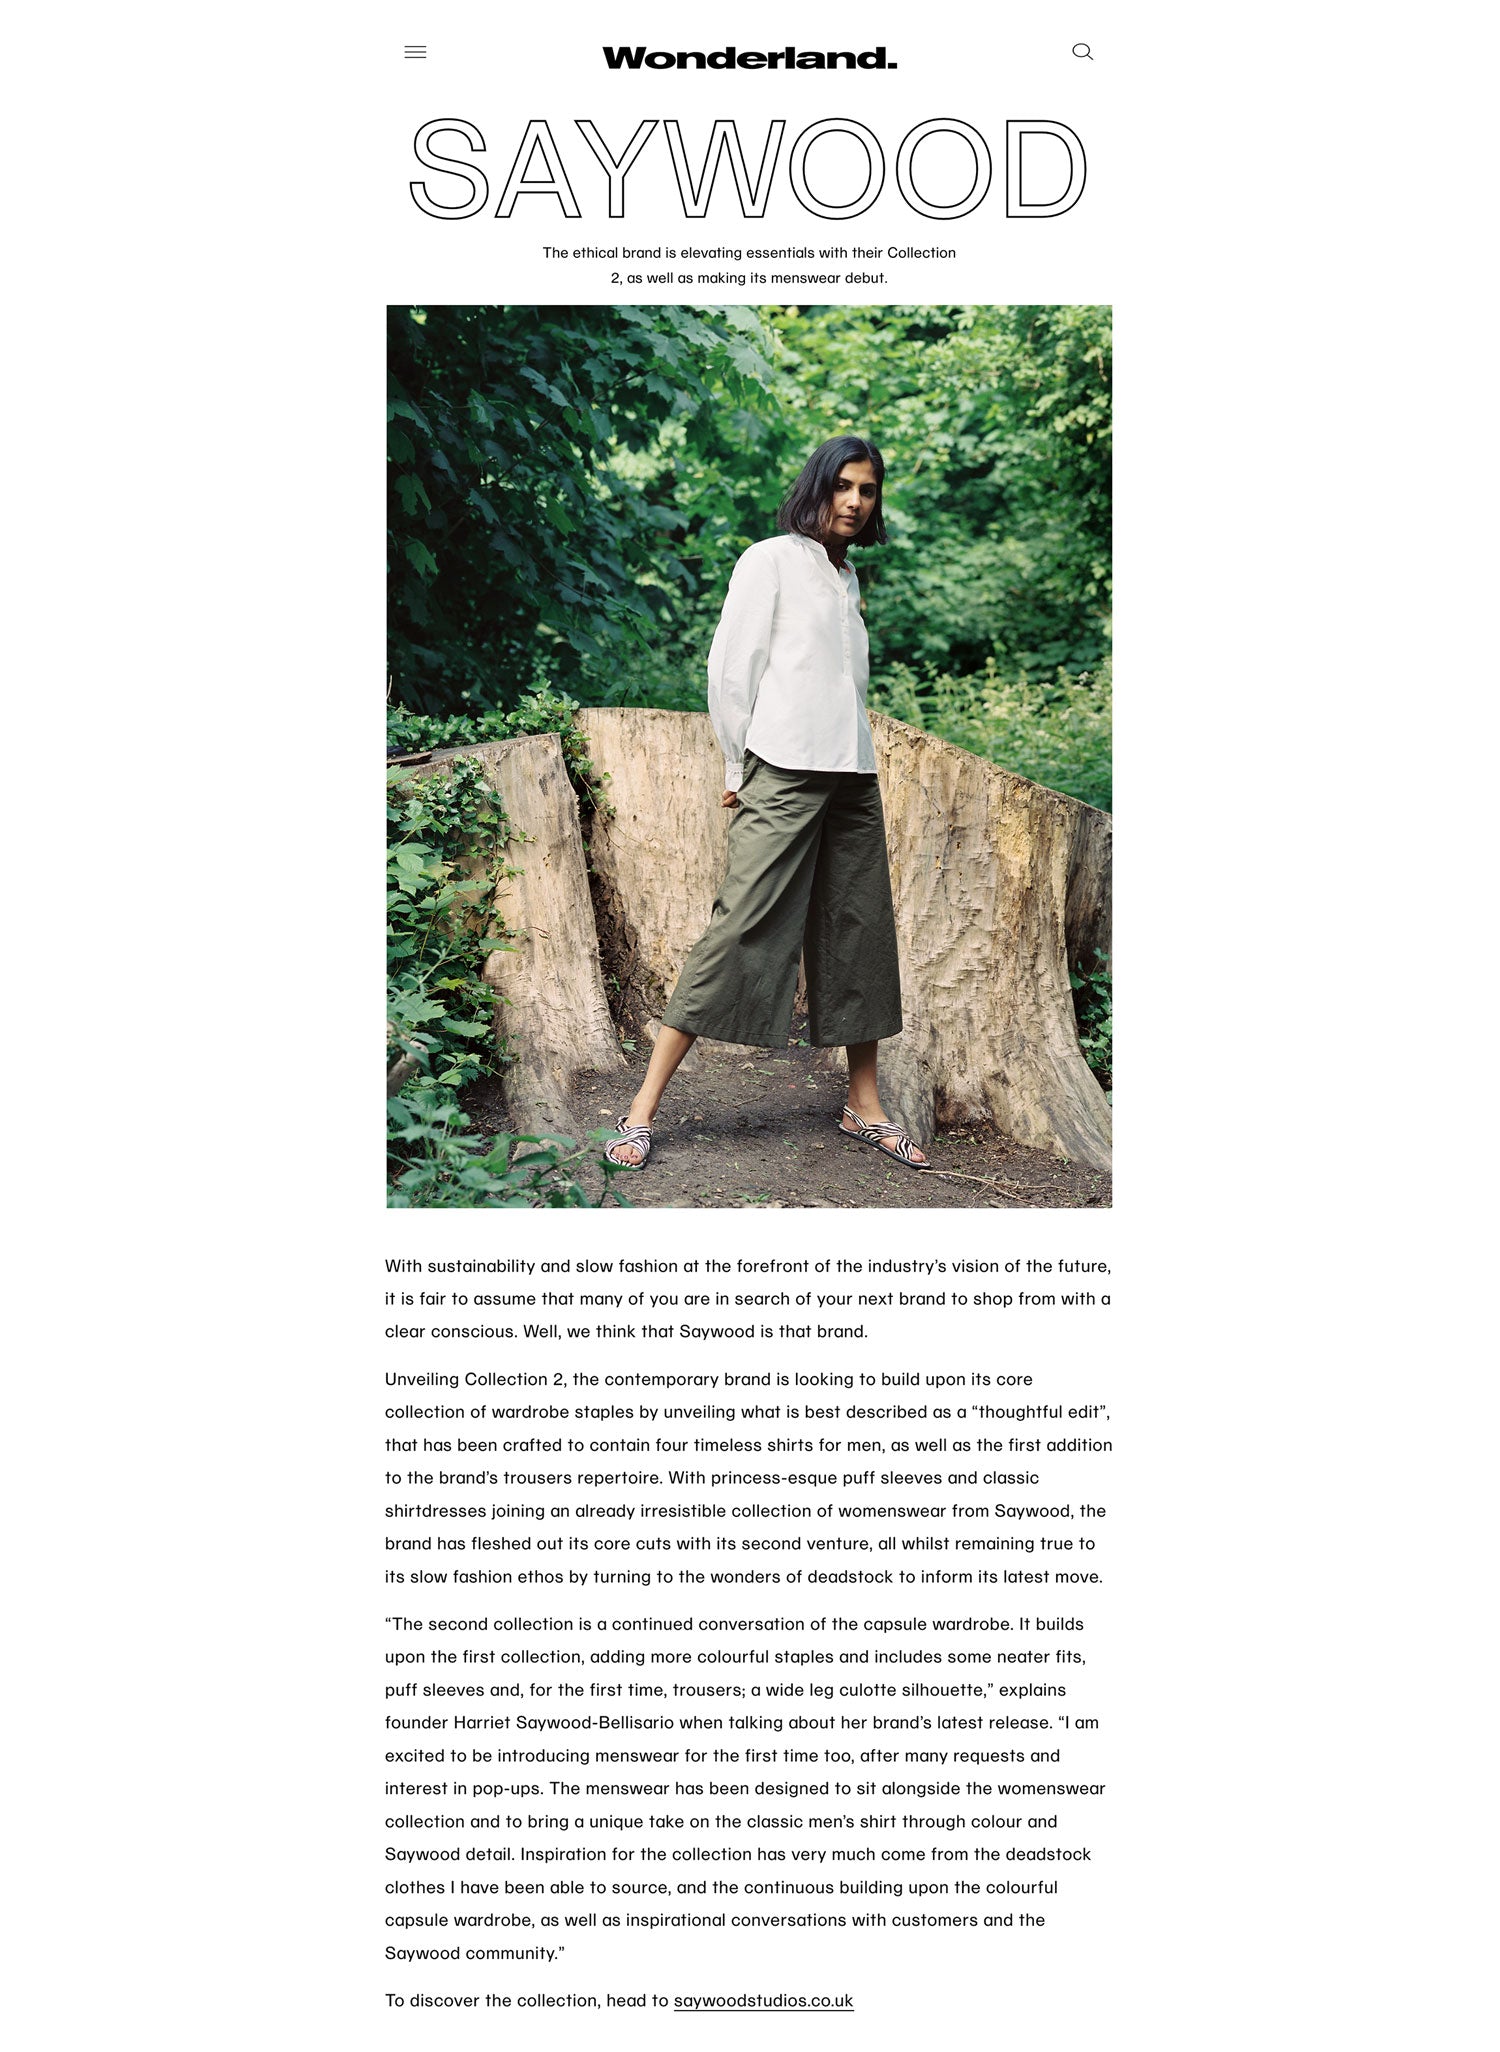 Image shows Saywood feature from Wonderland Digital. Text above and below image about the brand, with an image showing model wearing the Marie Blouse in white recycled cotton and the khaki Amelia Trouser, standing in front of green foliage and tree stumps